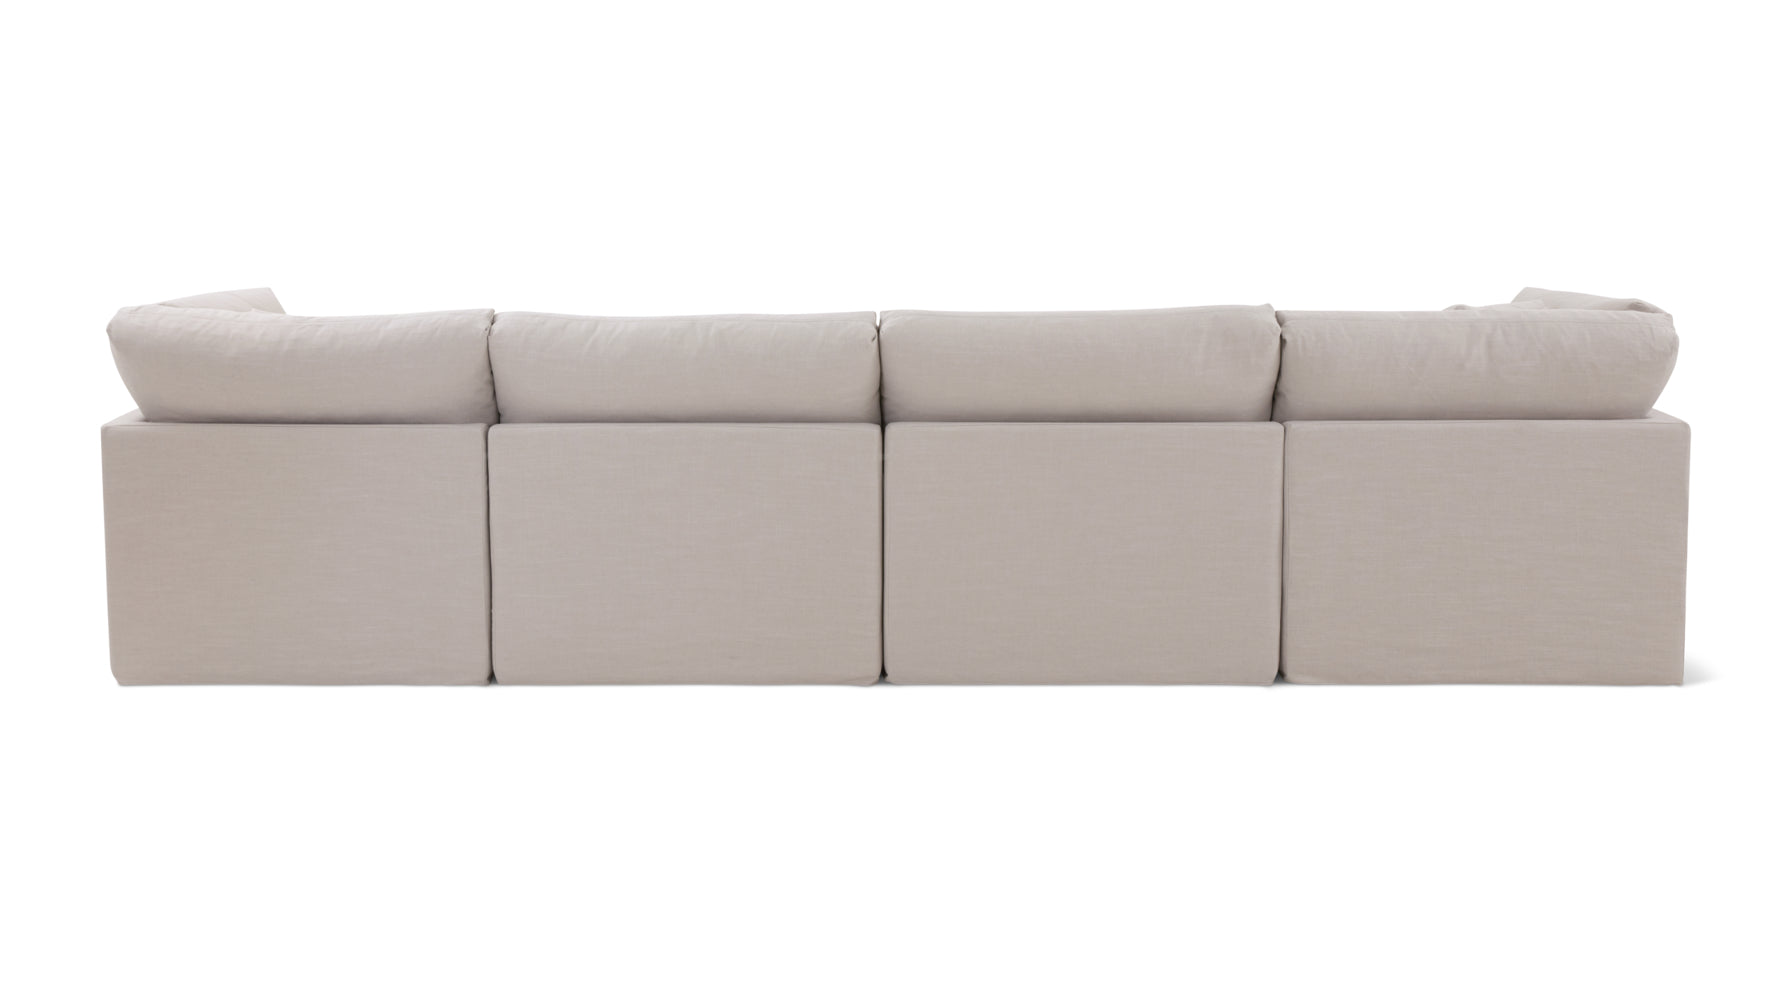 Get Together™ 6-Piece Modular U-Shaped Sectional, Standard, Clay - Image 6